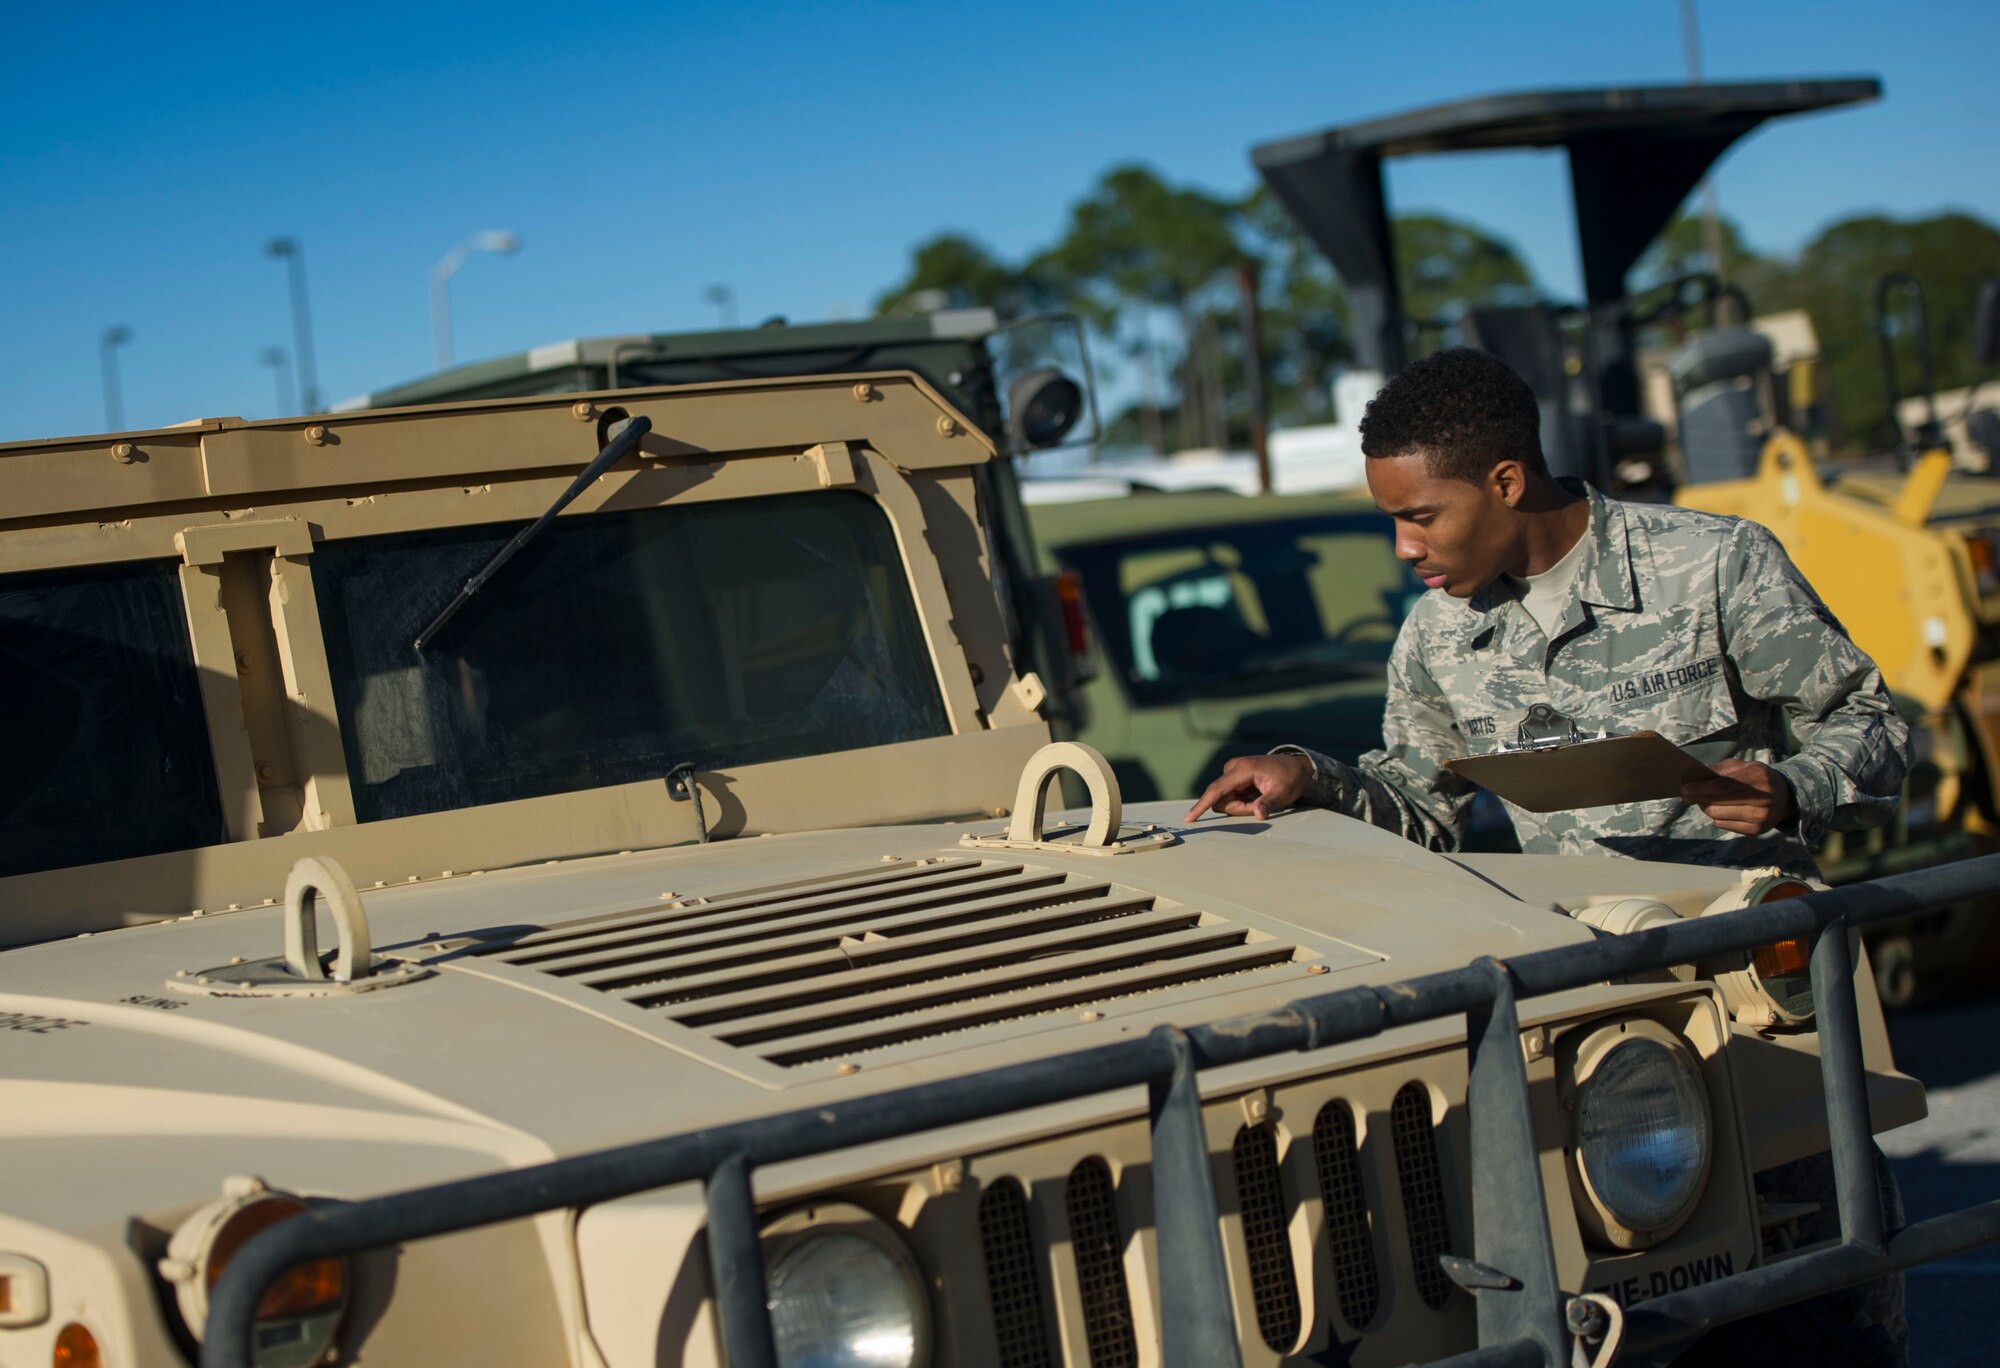 Airman 1st Class Jordan Artis, a vehicle management analysis journeyman with the 1st Special Operations Logistics Readiness Squadron, performs a yard check on Hurlburt Field, Fla., Jan. 12, 2016. There are approximately 100 different types of vehicles assigned to units at Hurlbrt. (U.S. Air Force photo by Senior Airman Krystal M. Garrett)